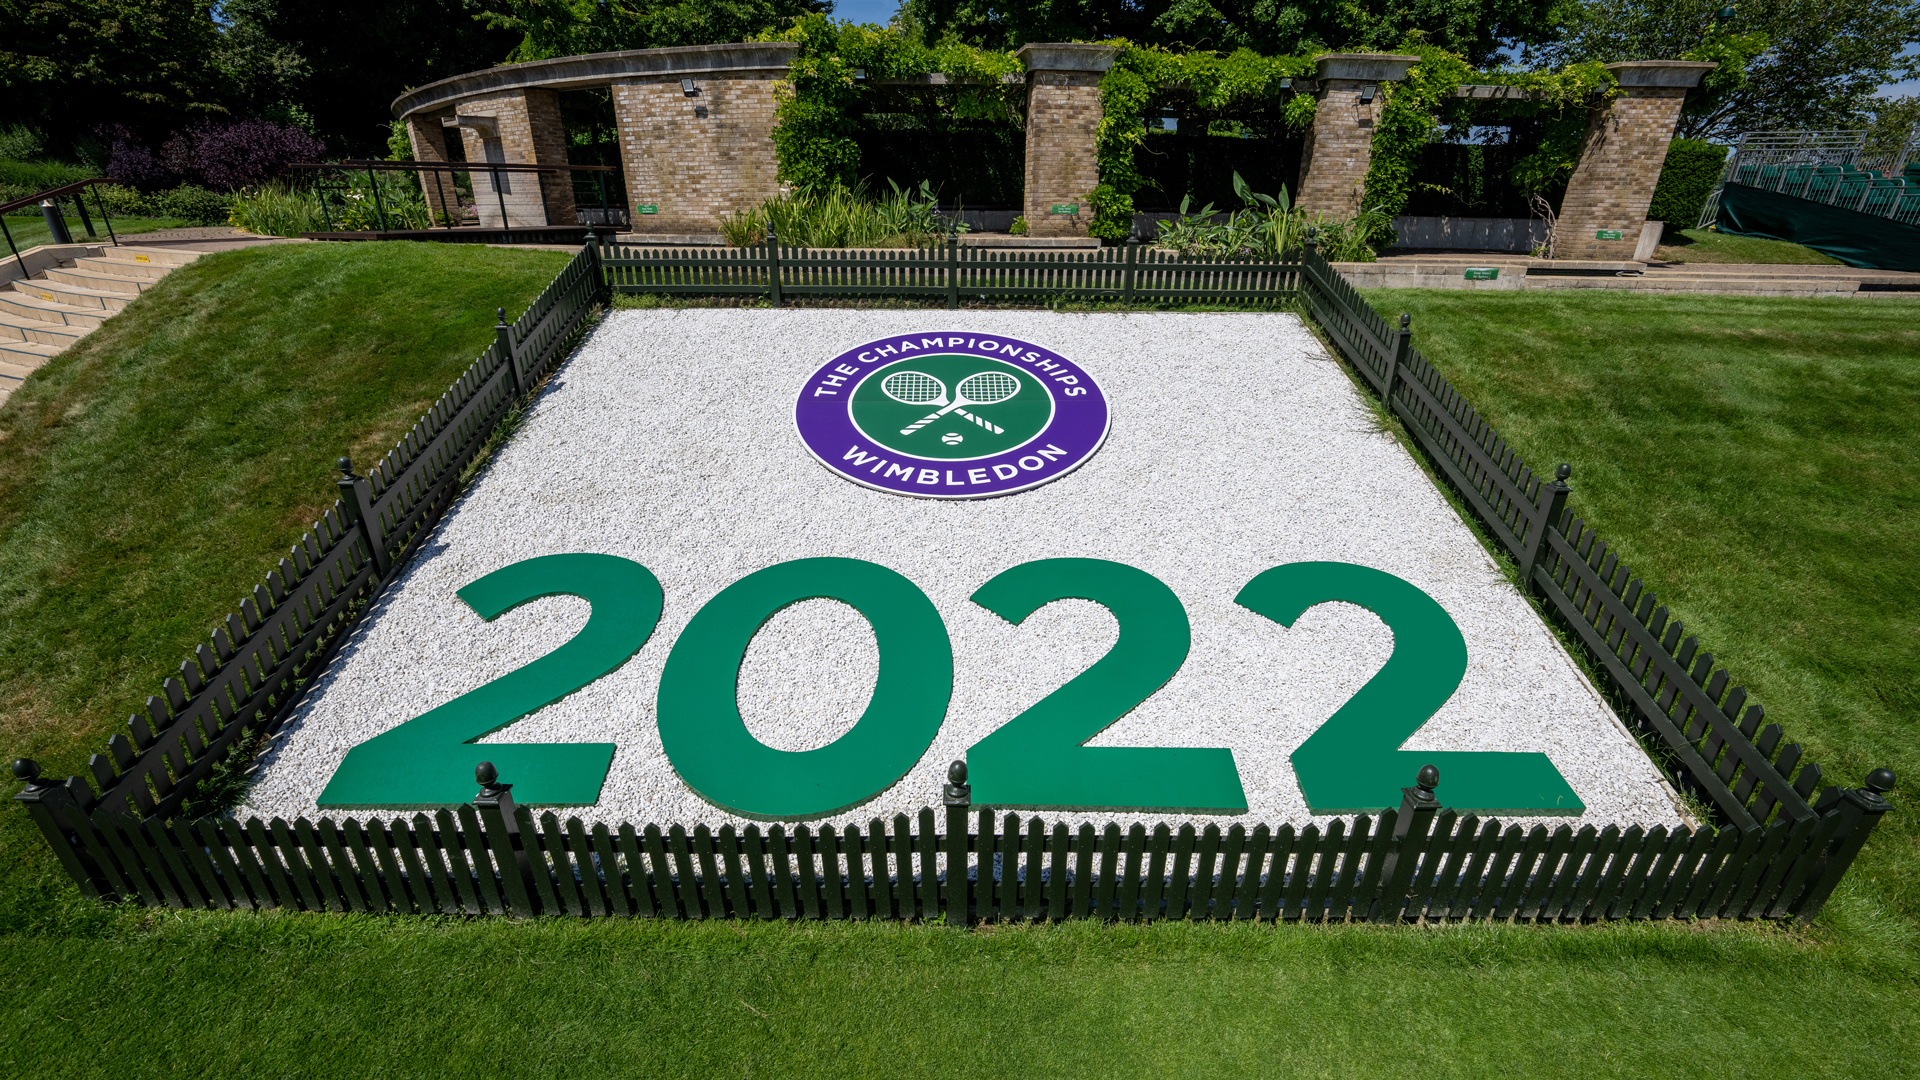 IBM Reveals New AI and Cloud Powered Fan Experiences for Wimbledon 2022